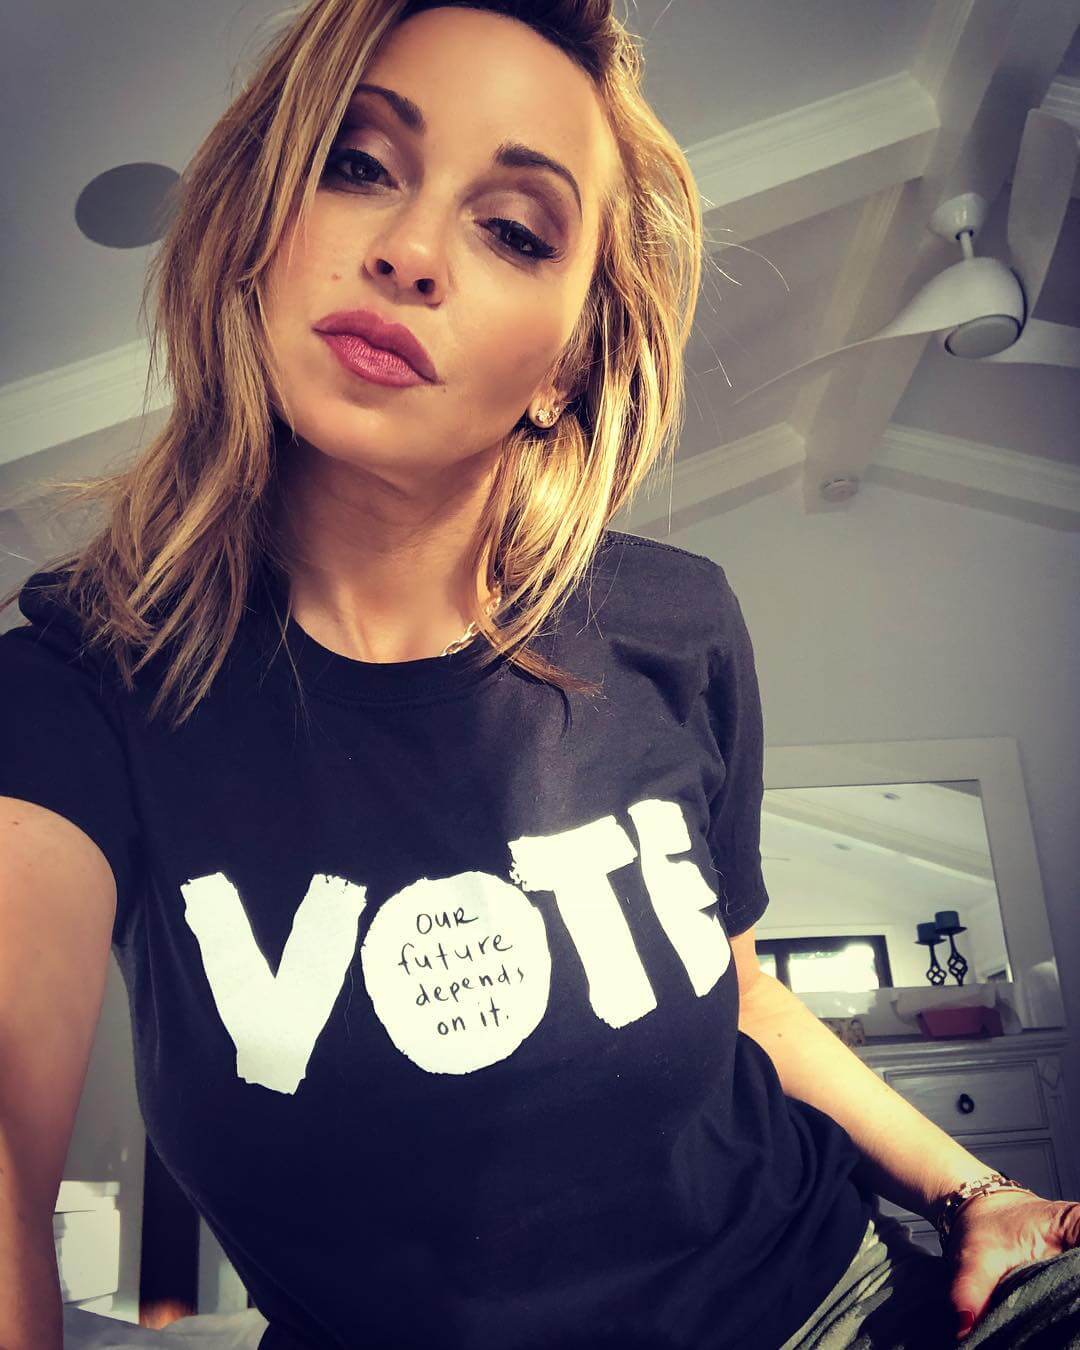 60+ Hot Pictures Of Tara Strong Are Here To Take Your Breath Away | Best Of Comic Books